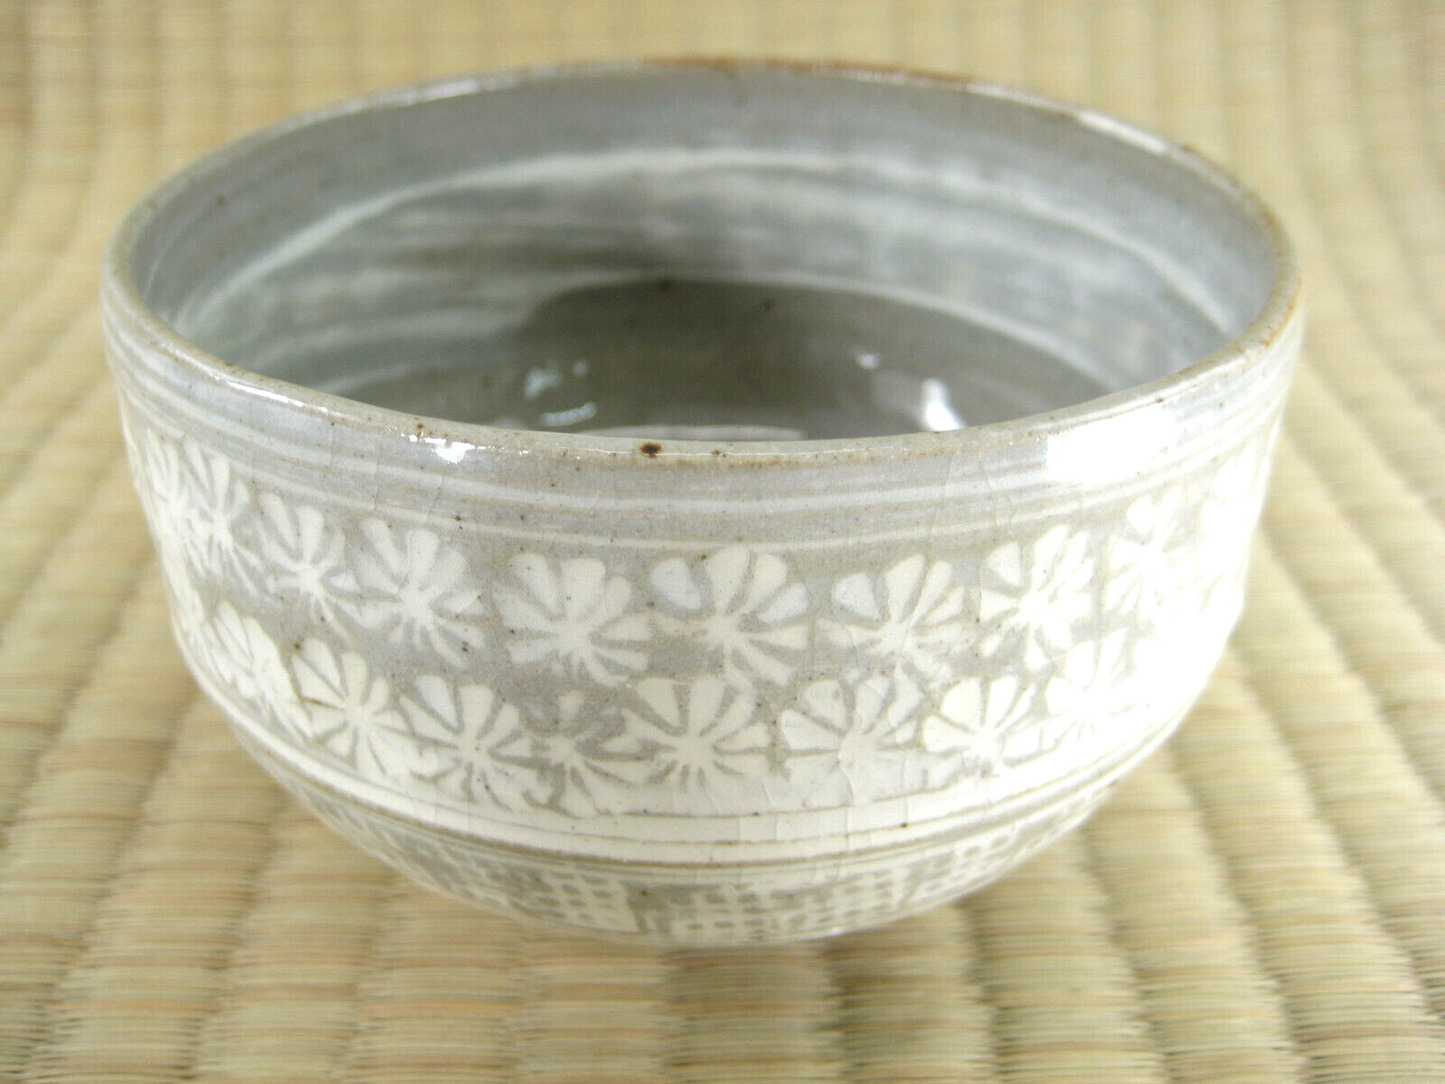 Vintage Japanese Chawan Tea Ceremony Bowl Hand Stamped Flowers Gray&White4"